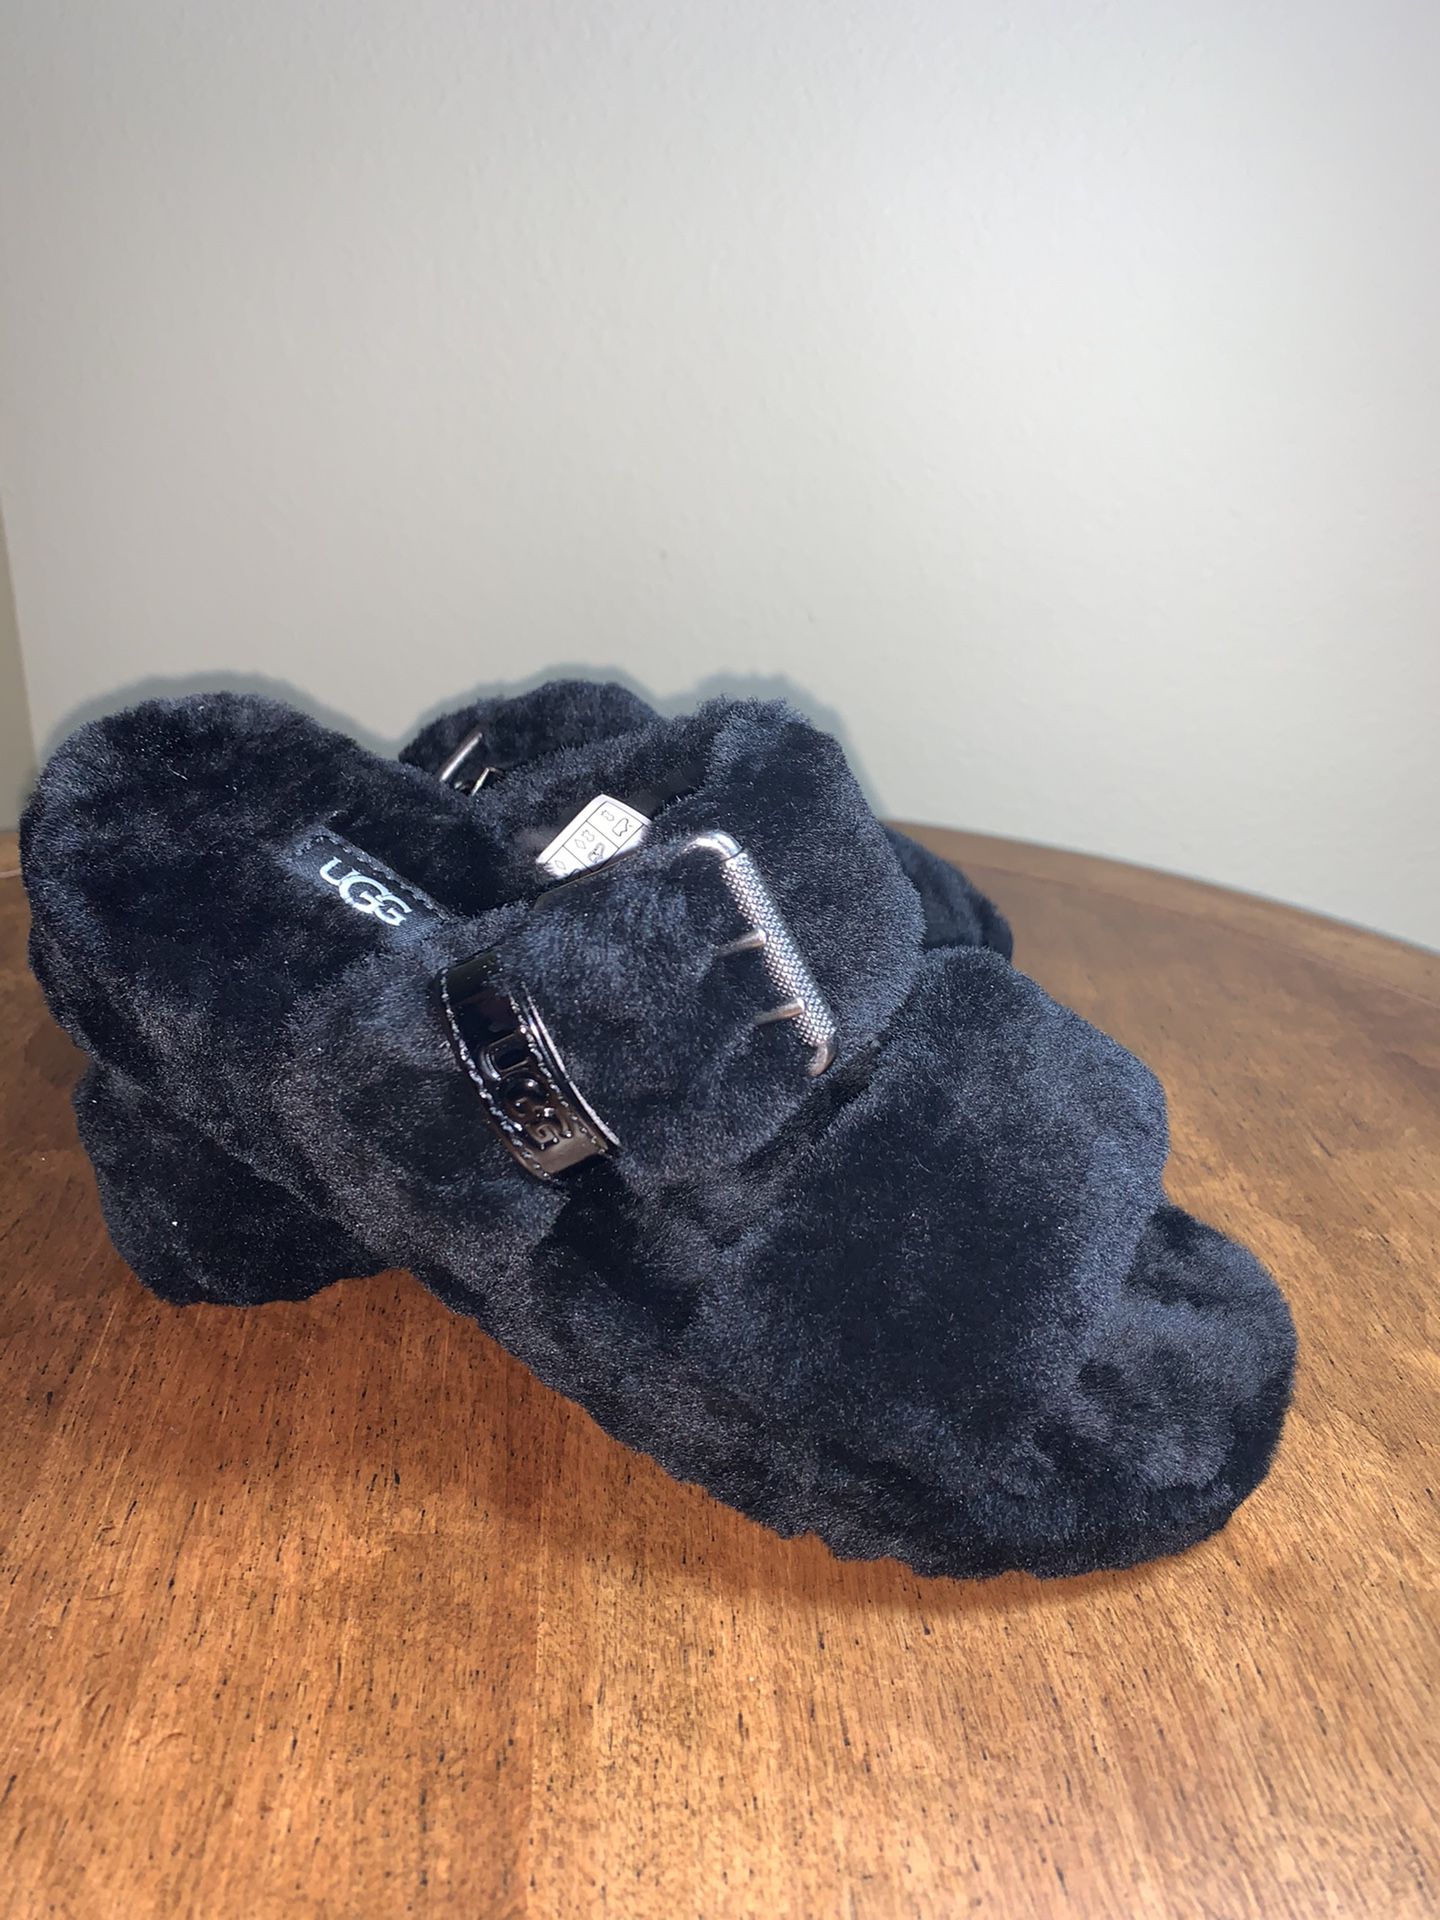 Ugg Slippers Size 7 Brand New